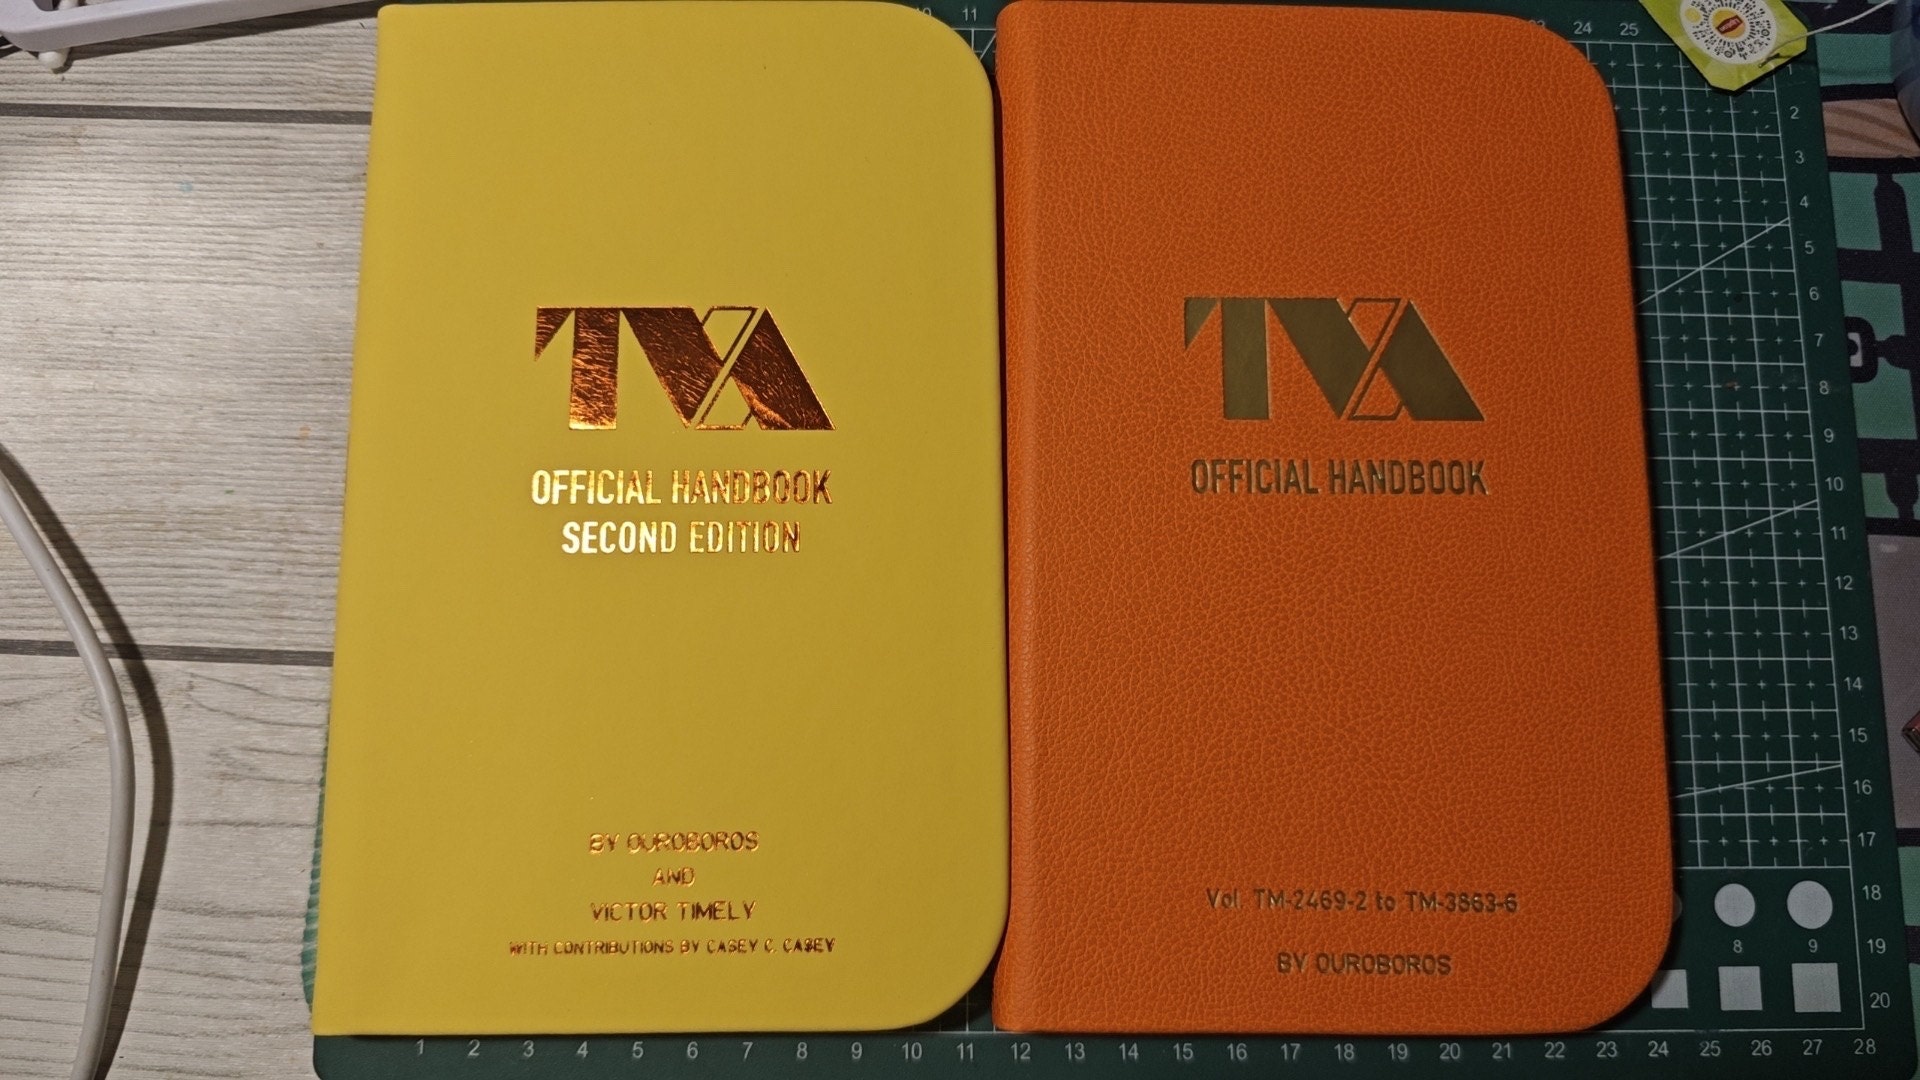 TVA 1st and 2nd Edition.jpg